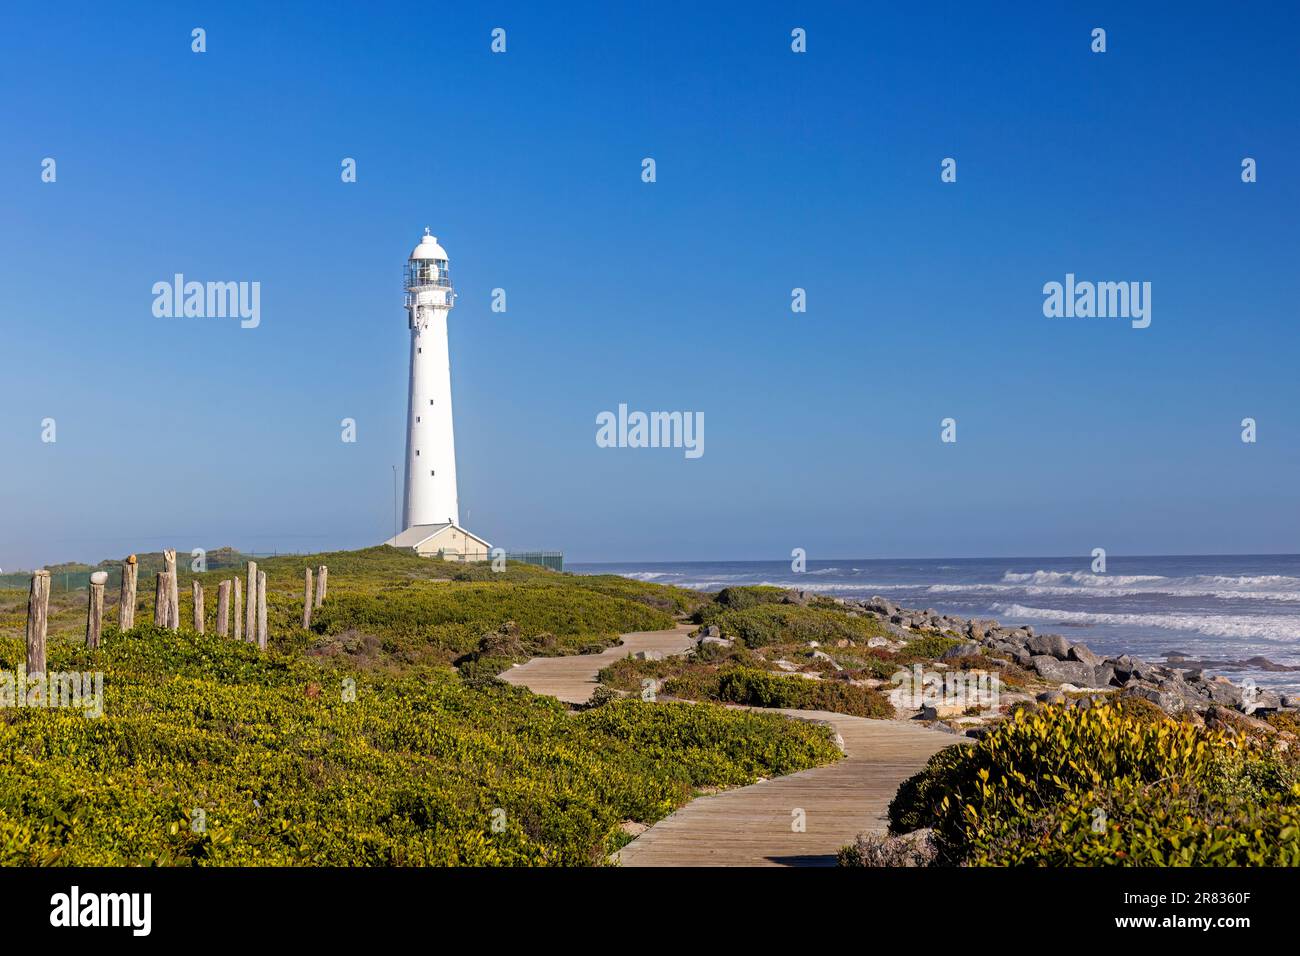 Slangkop Lighthouse in Kommetjie near Cape Town, South Africa Stock Photo